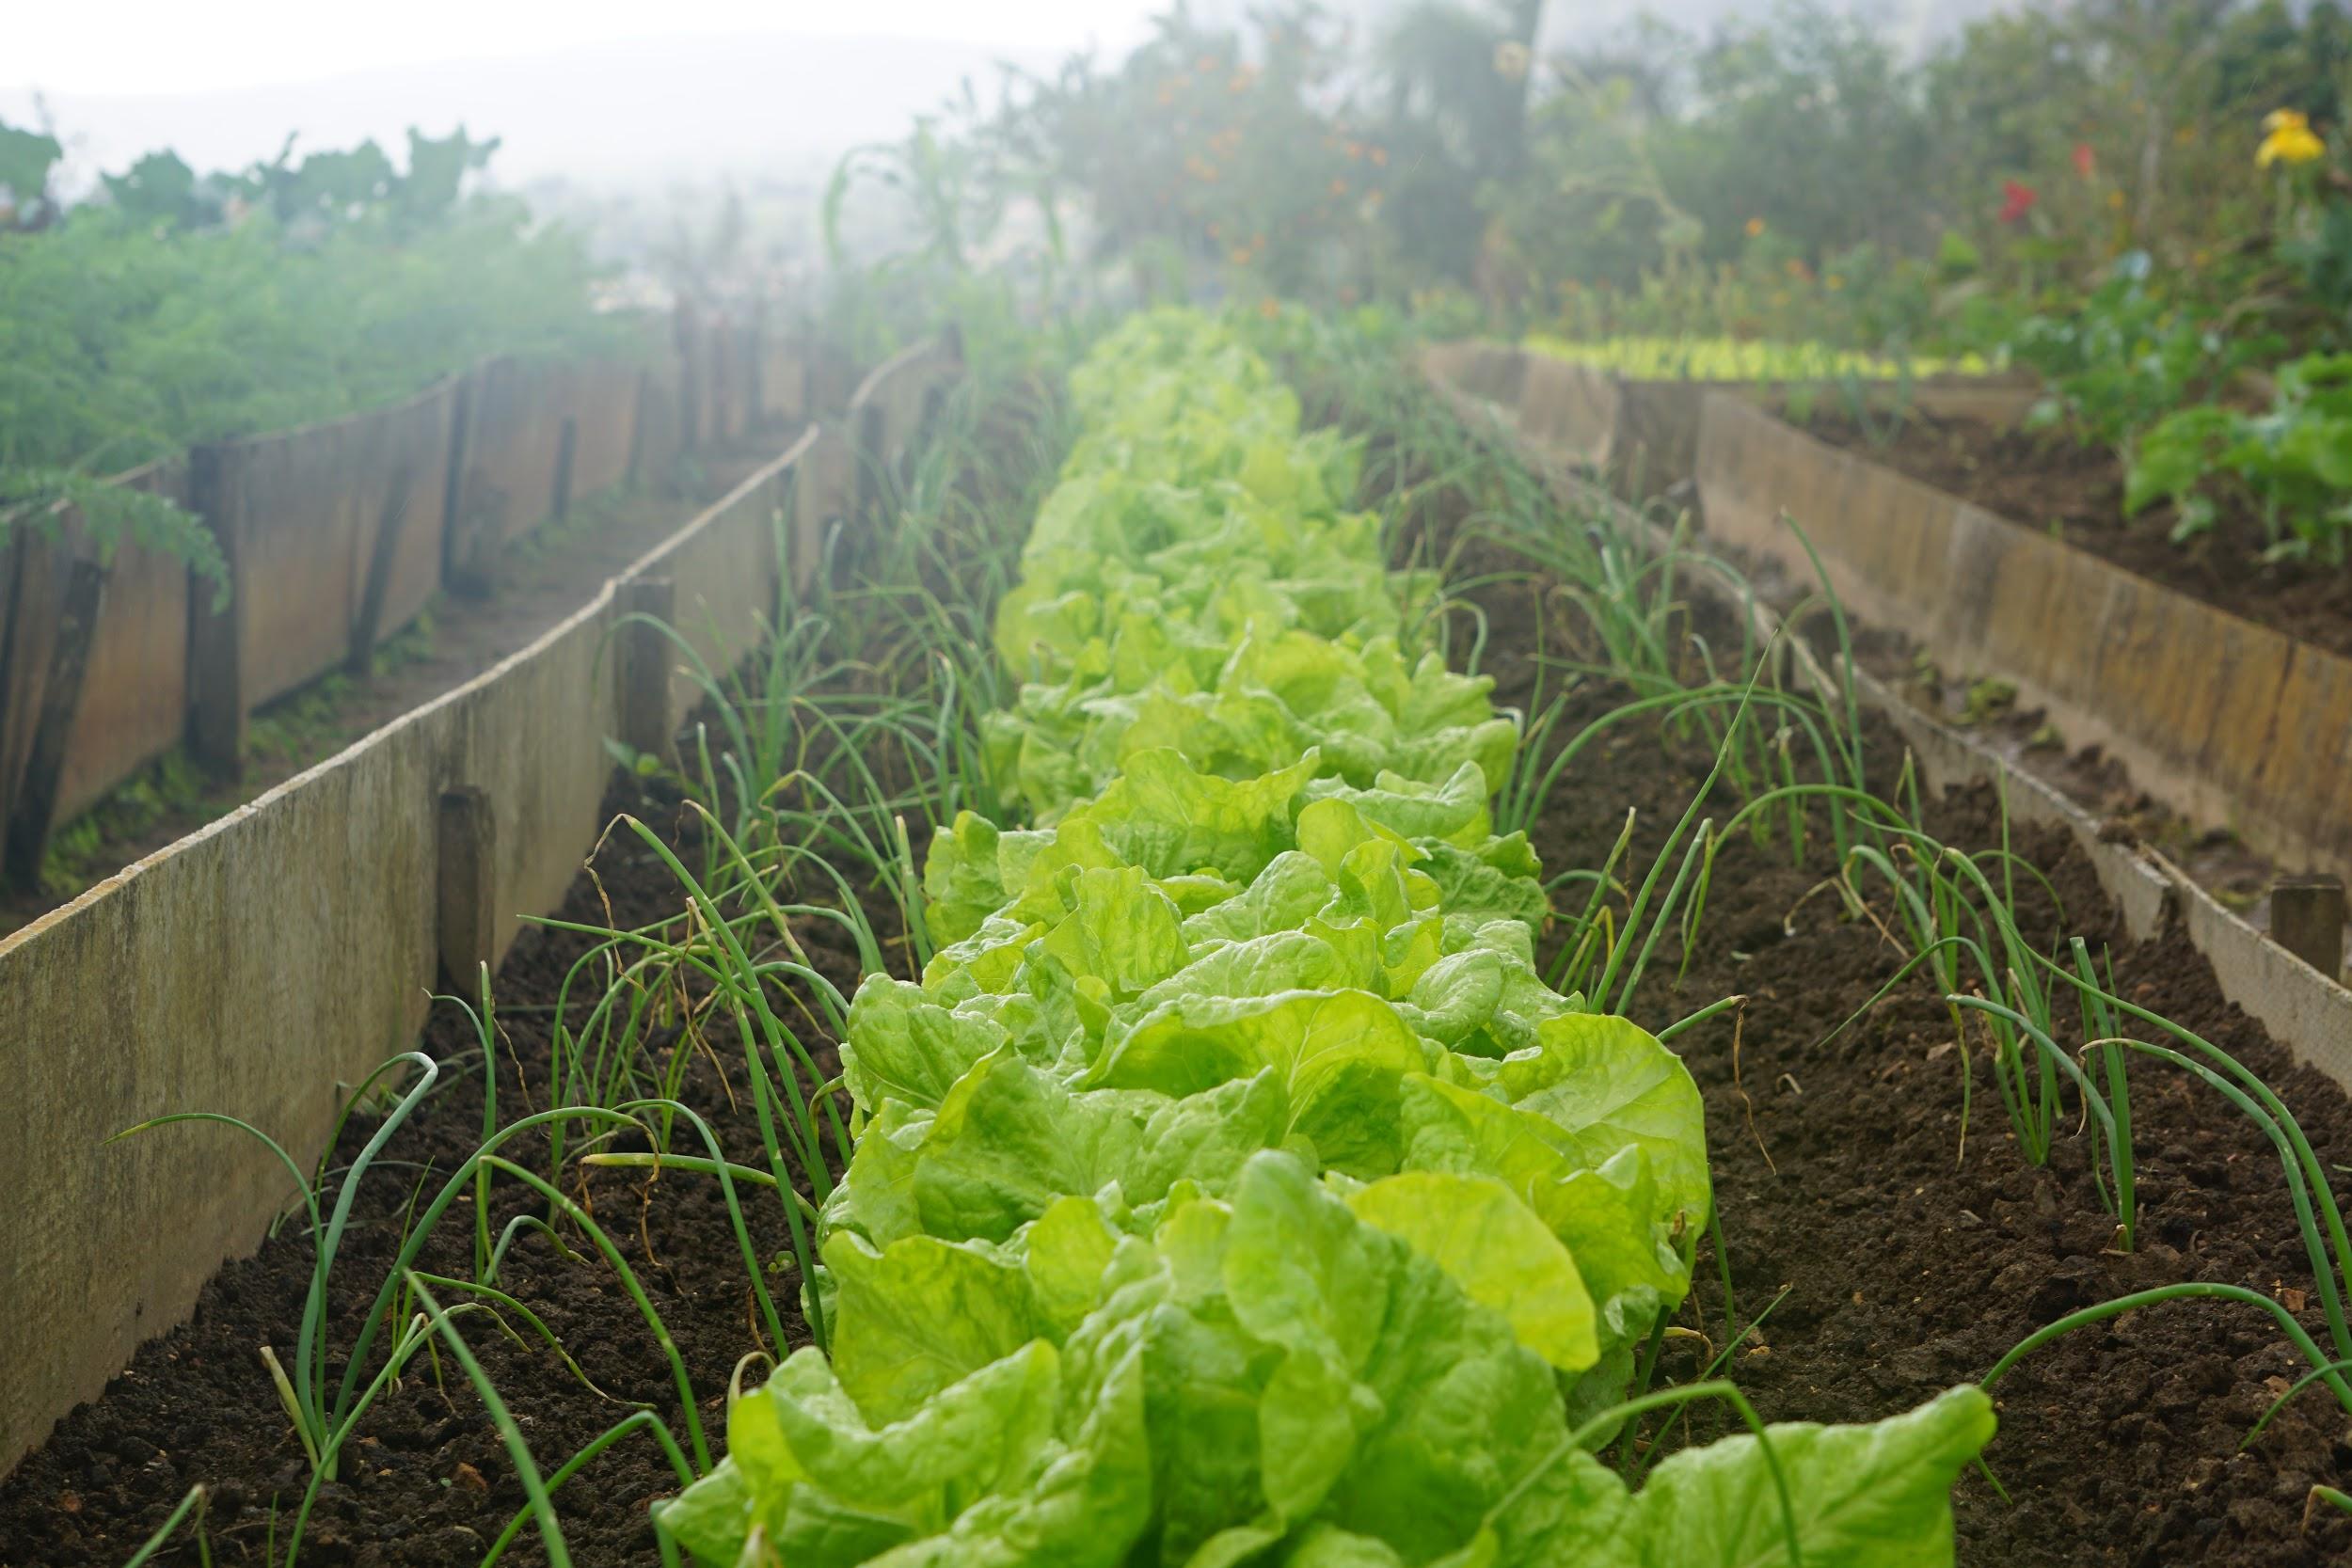 Green leafy vegetables are shown growing in a field of rich, brown soil.